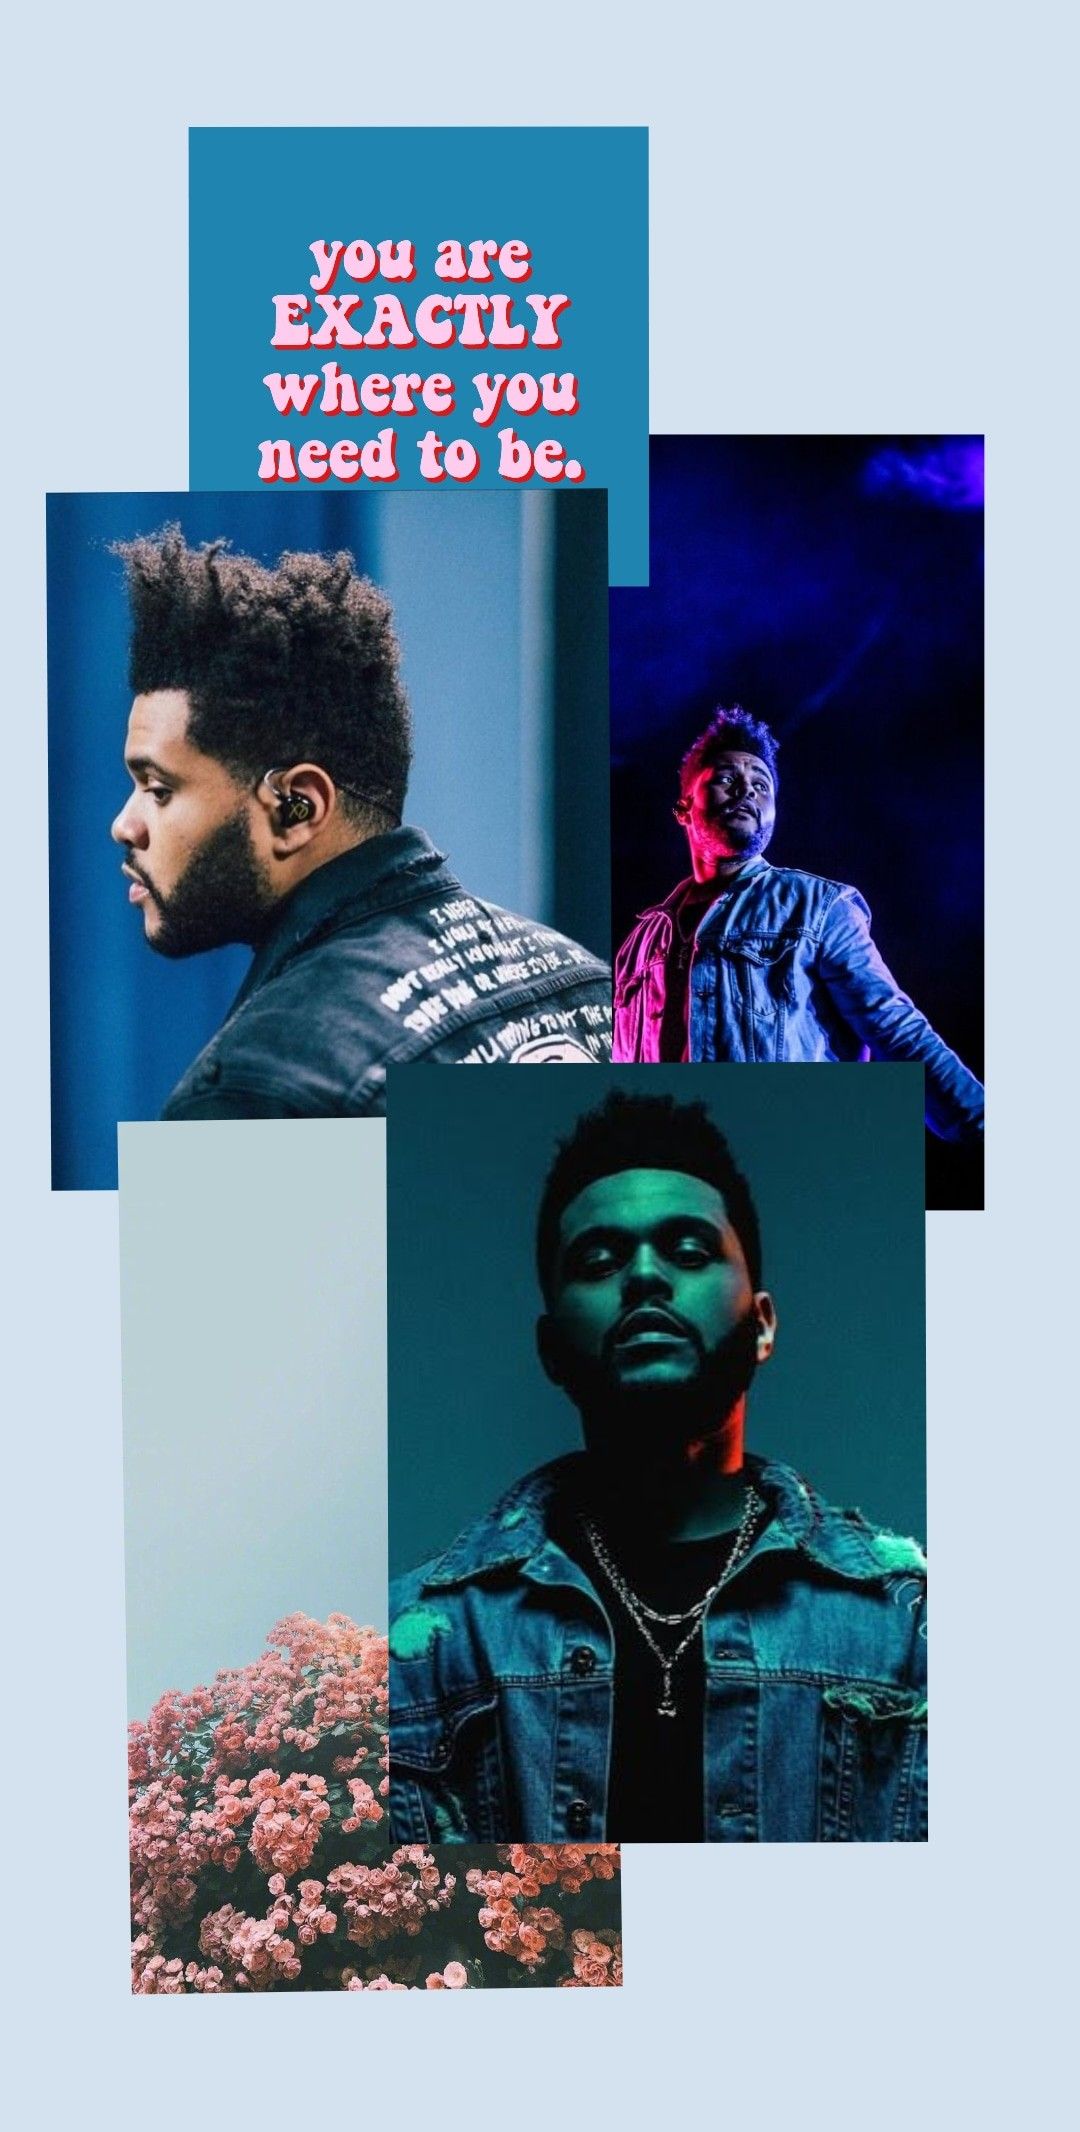 AESTHETIC WALLPAPERS. The weeknd wallpaper iphone, The weeknd background, The weeknd poster